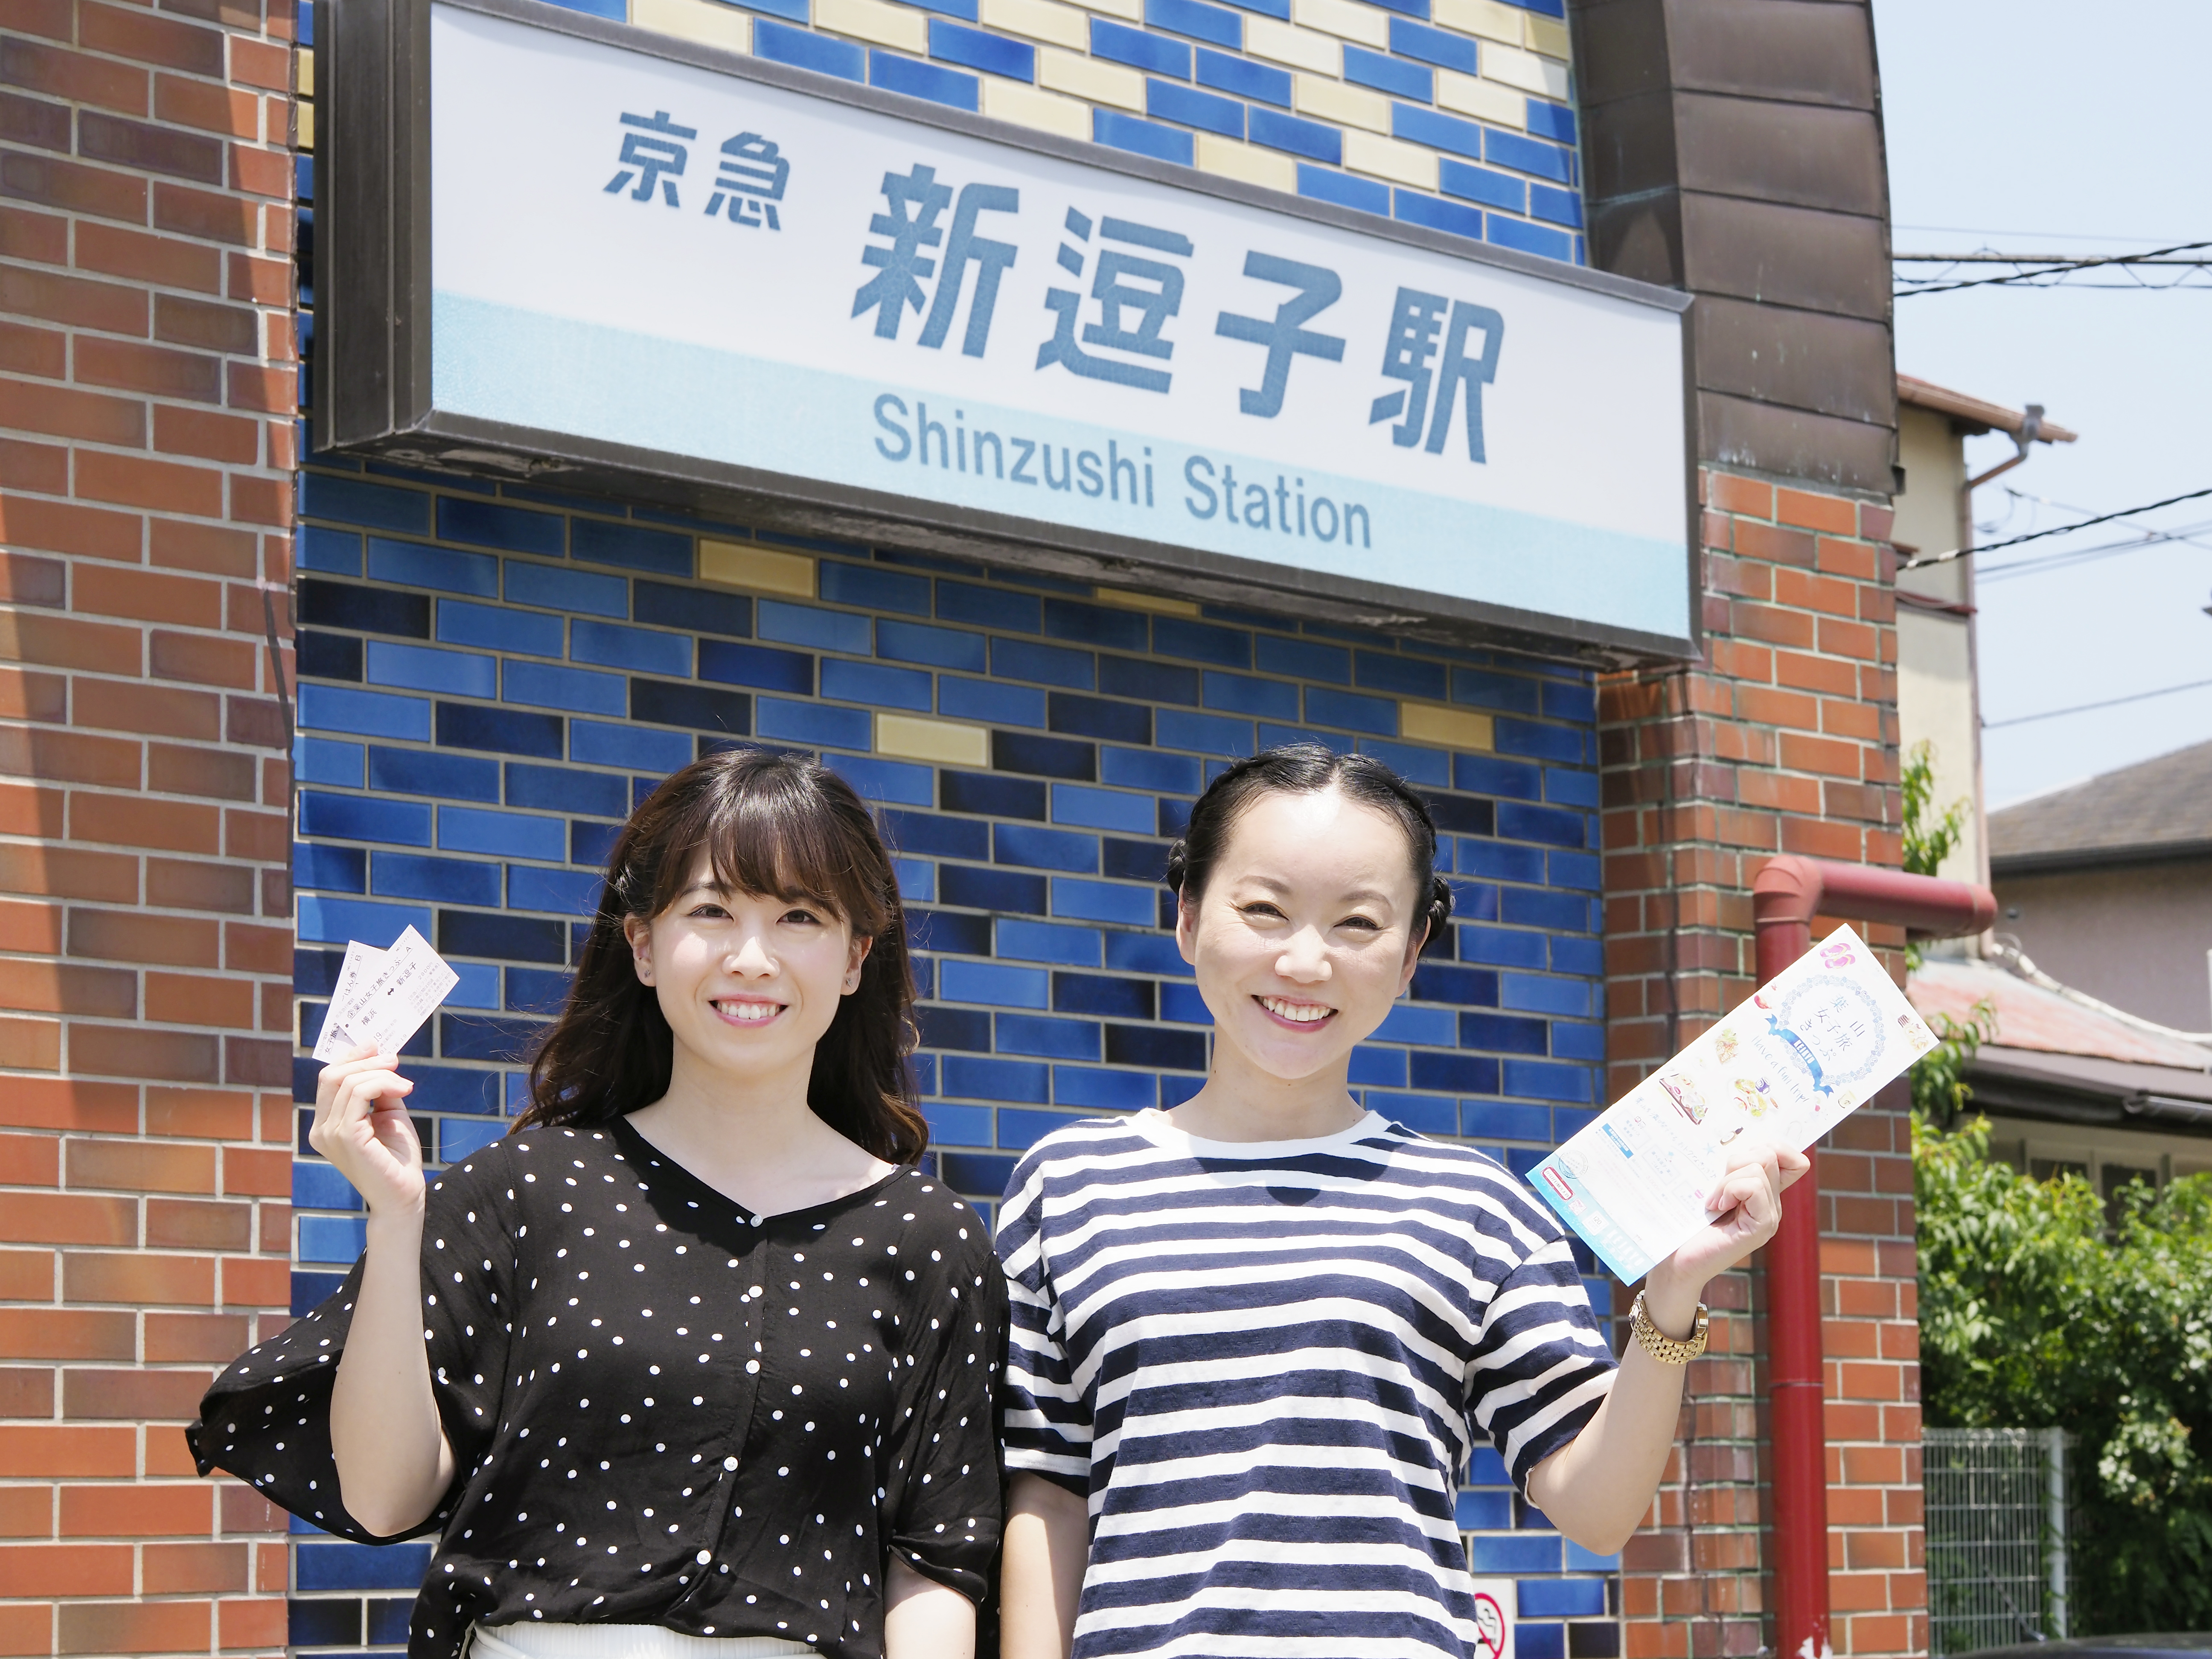 Grab the “Hayama Women’s Trip Ticket” and head out for sightseeing in Zushi and Hayama!